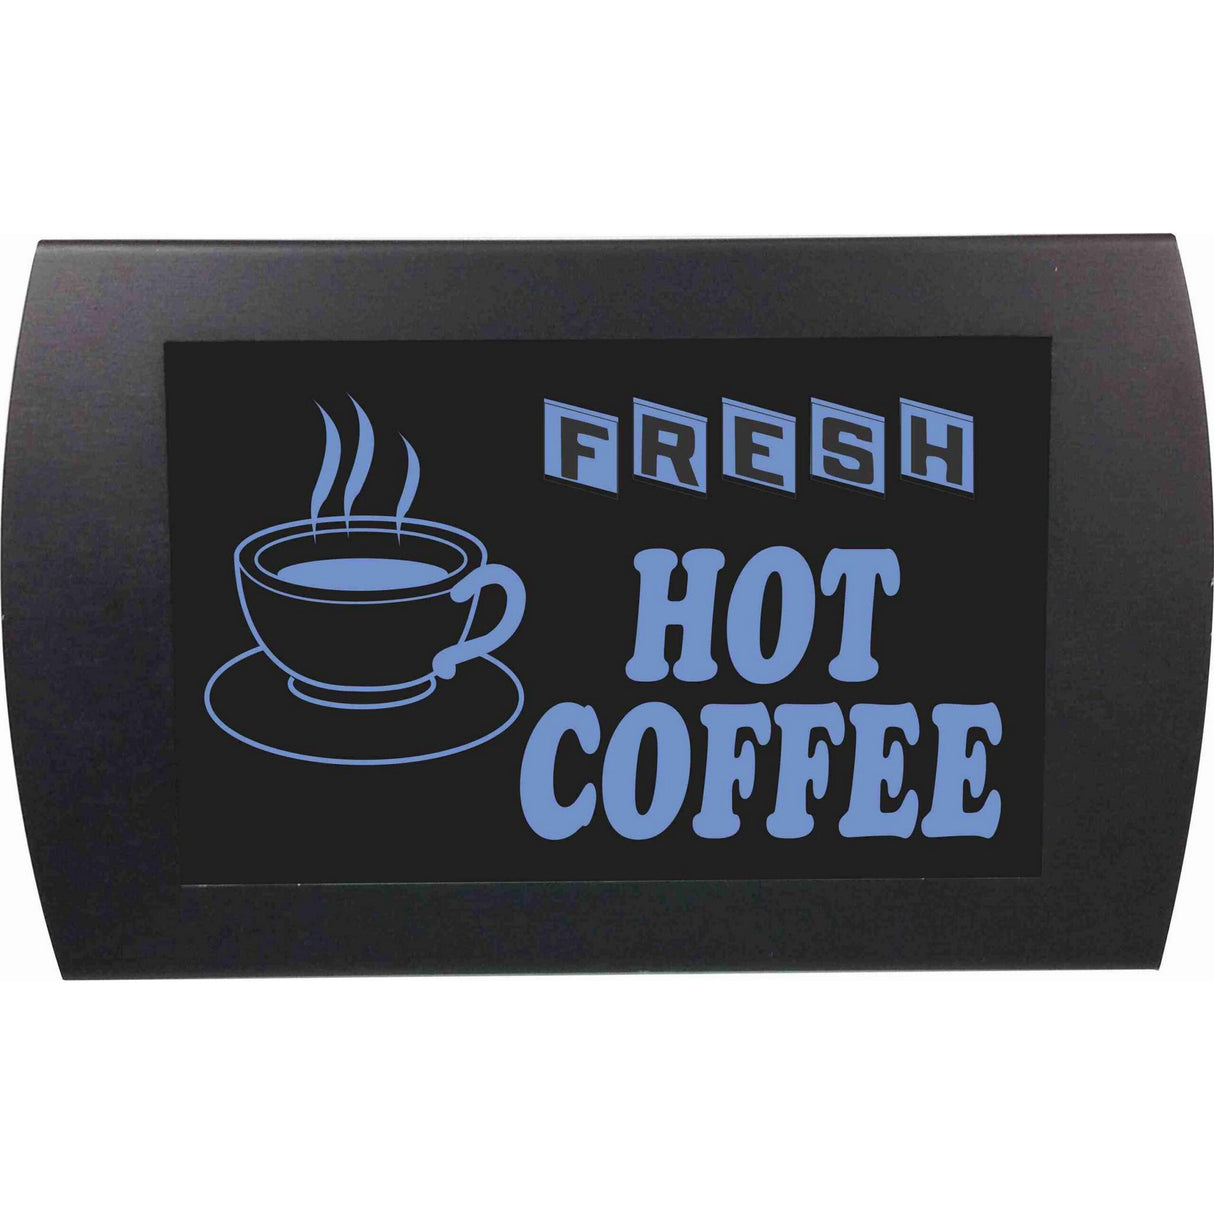 American Recorder OAS-2032M-BL "FRESH HOT COFFEE" LED Lighted Sign, Blue